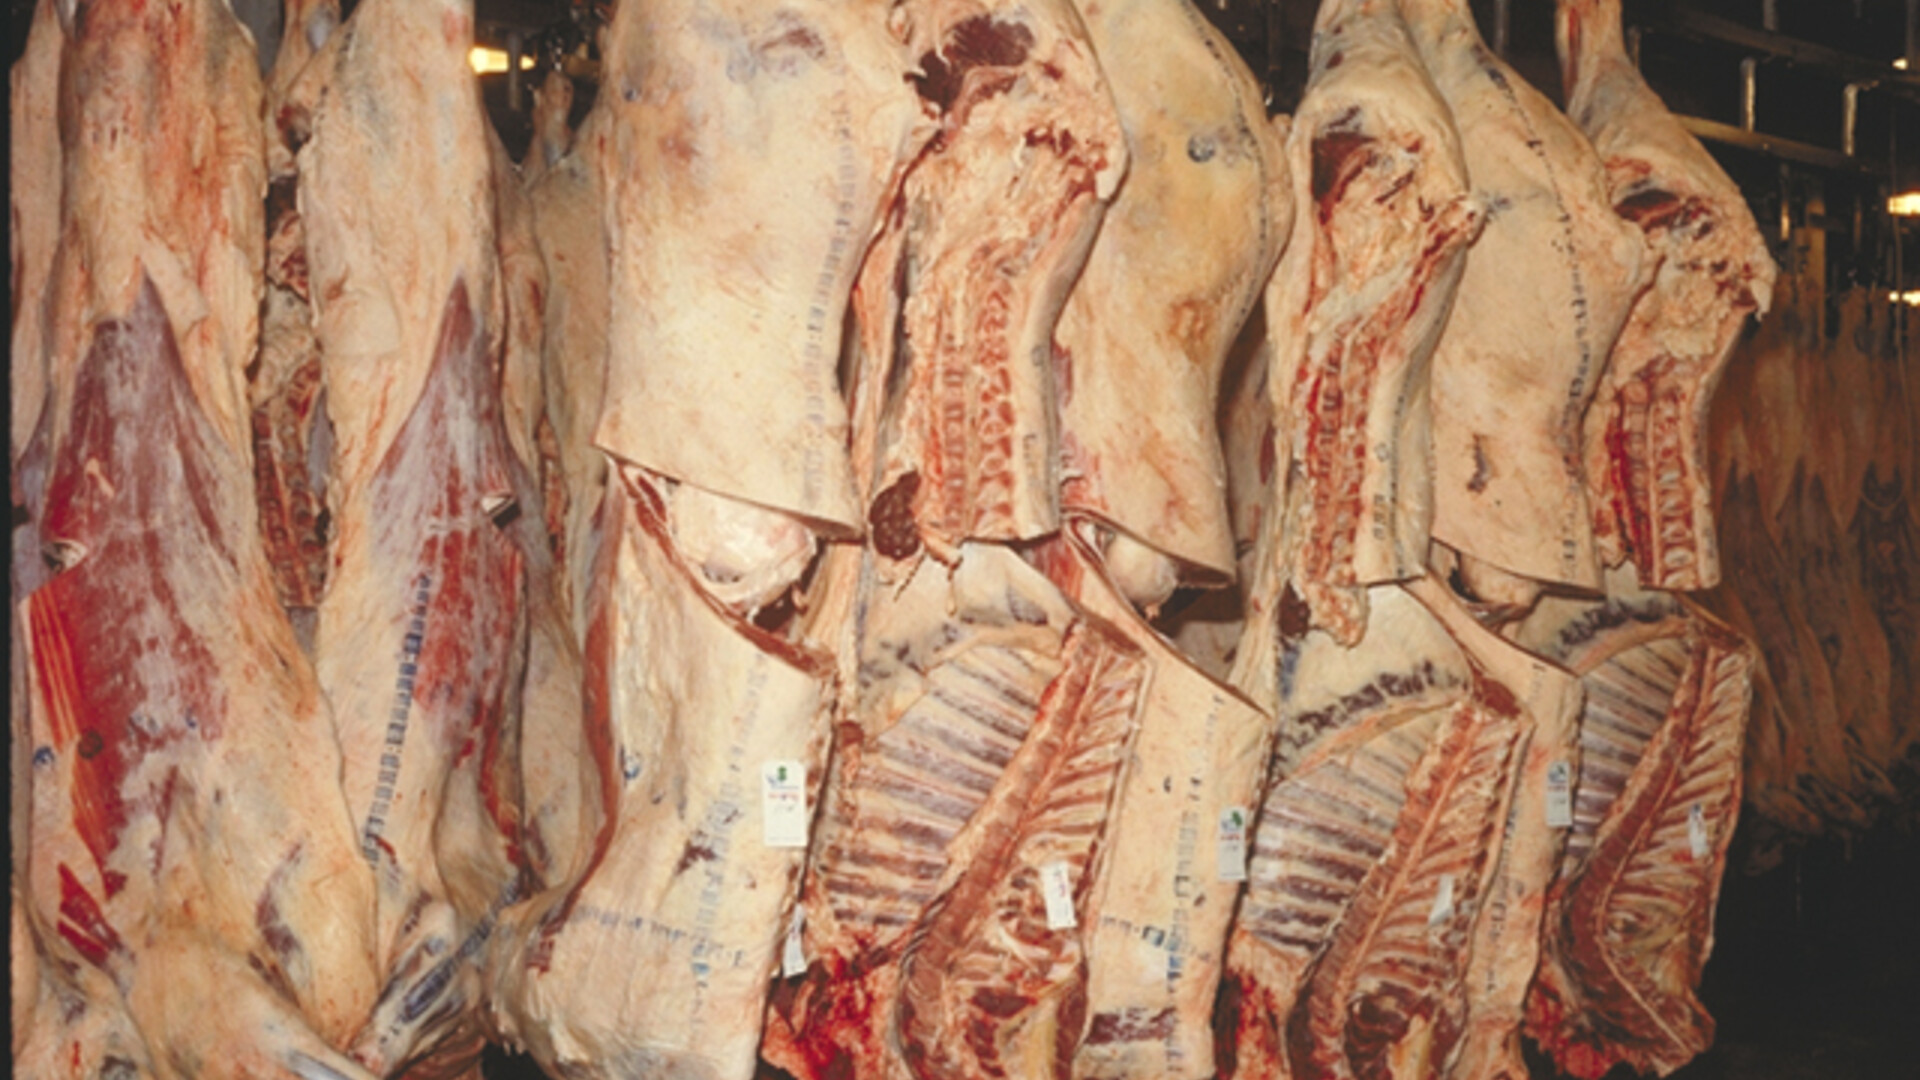 Grant Awarded to Boost Southeast Pork & Beef Processing